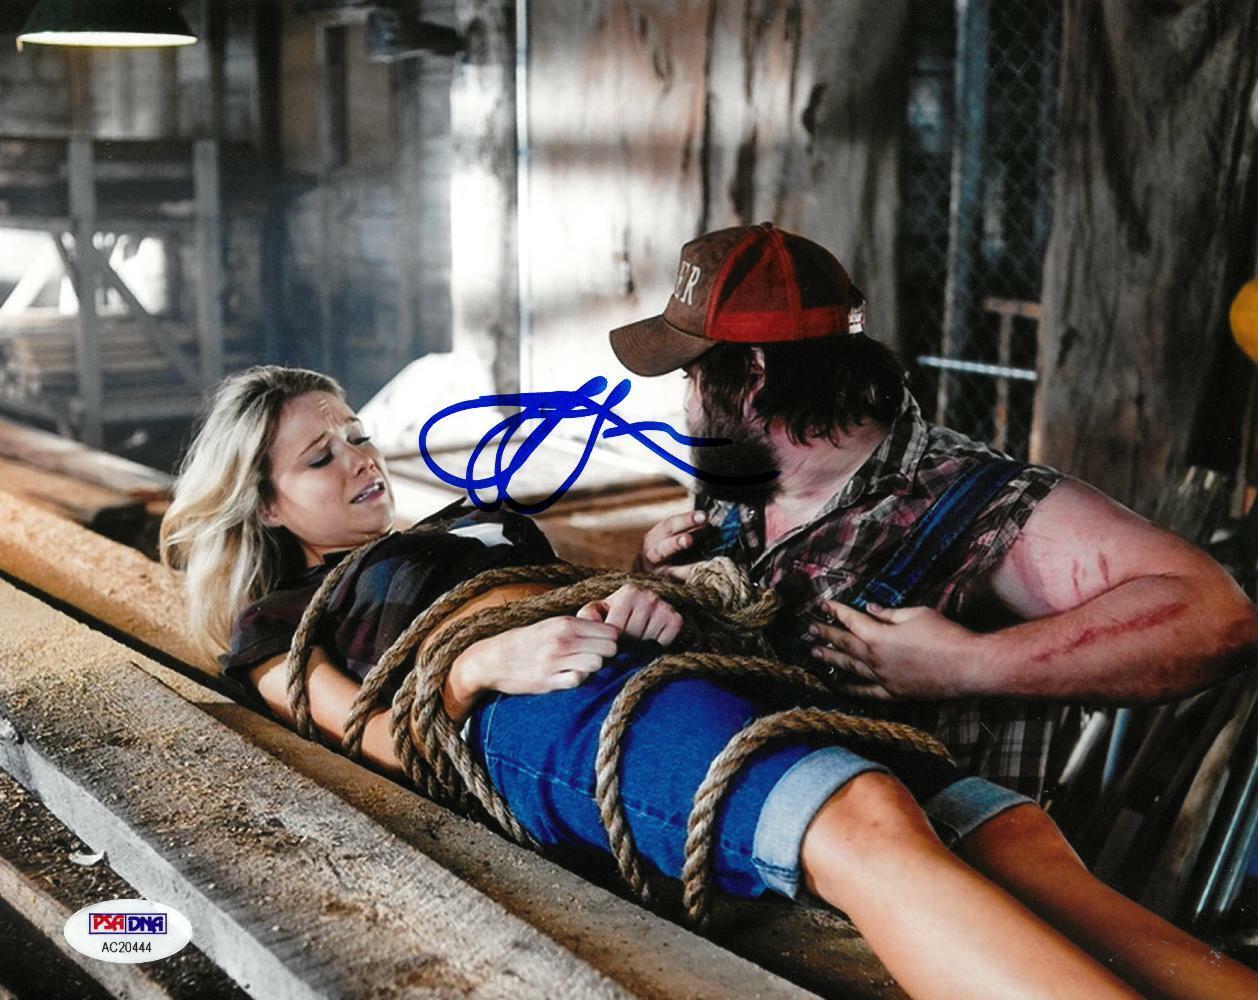 Tyler Labine Signed Tucker & Dale Vs Evil Autographed 8x10 Photo Poster painting PSA/DNA#AC20444